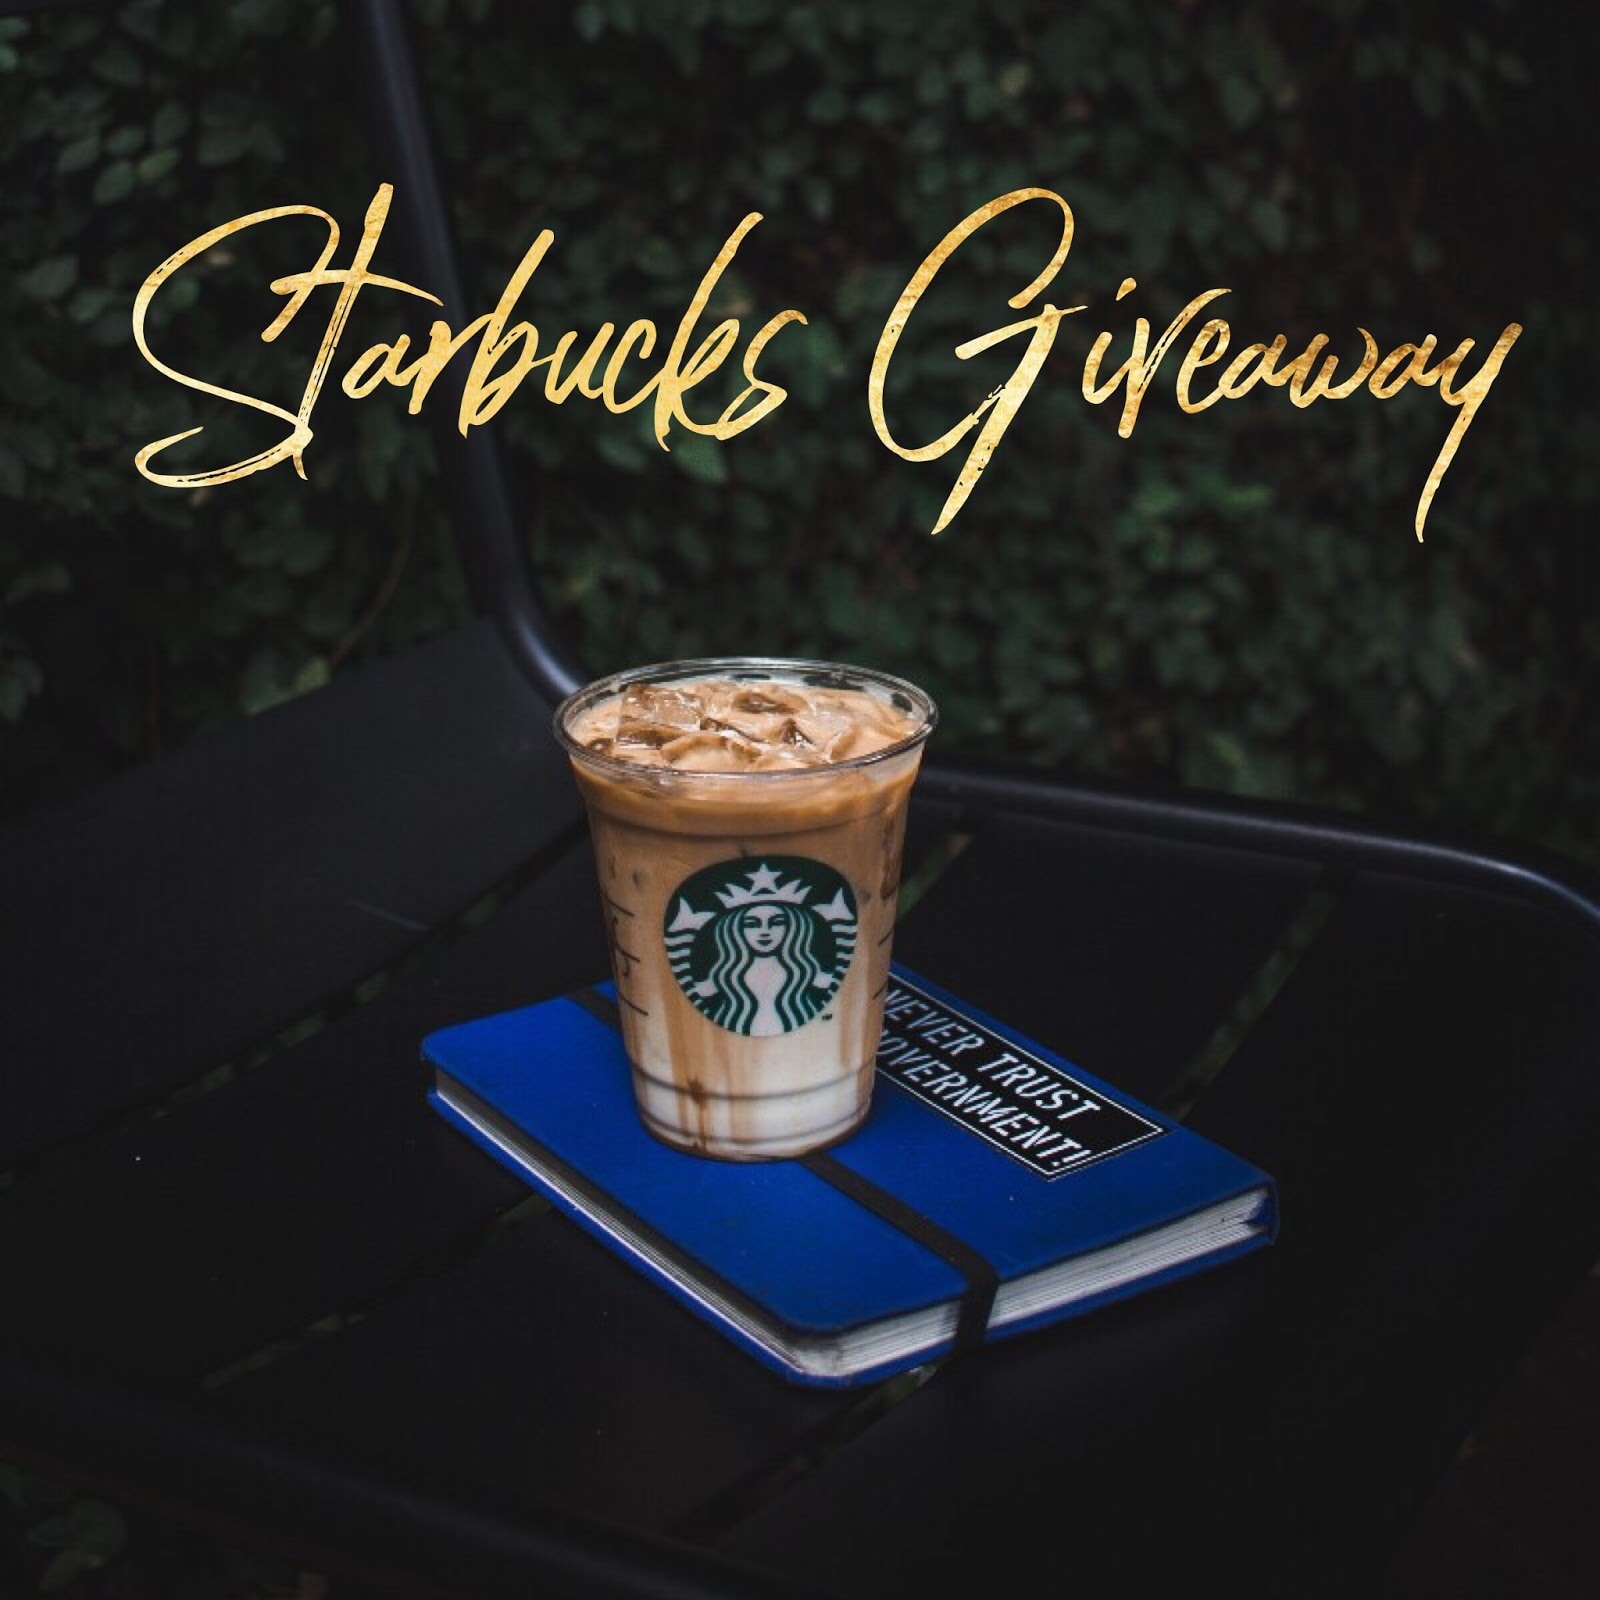 April Starbucks Insta Giveaway ends May 4, 2018